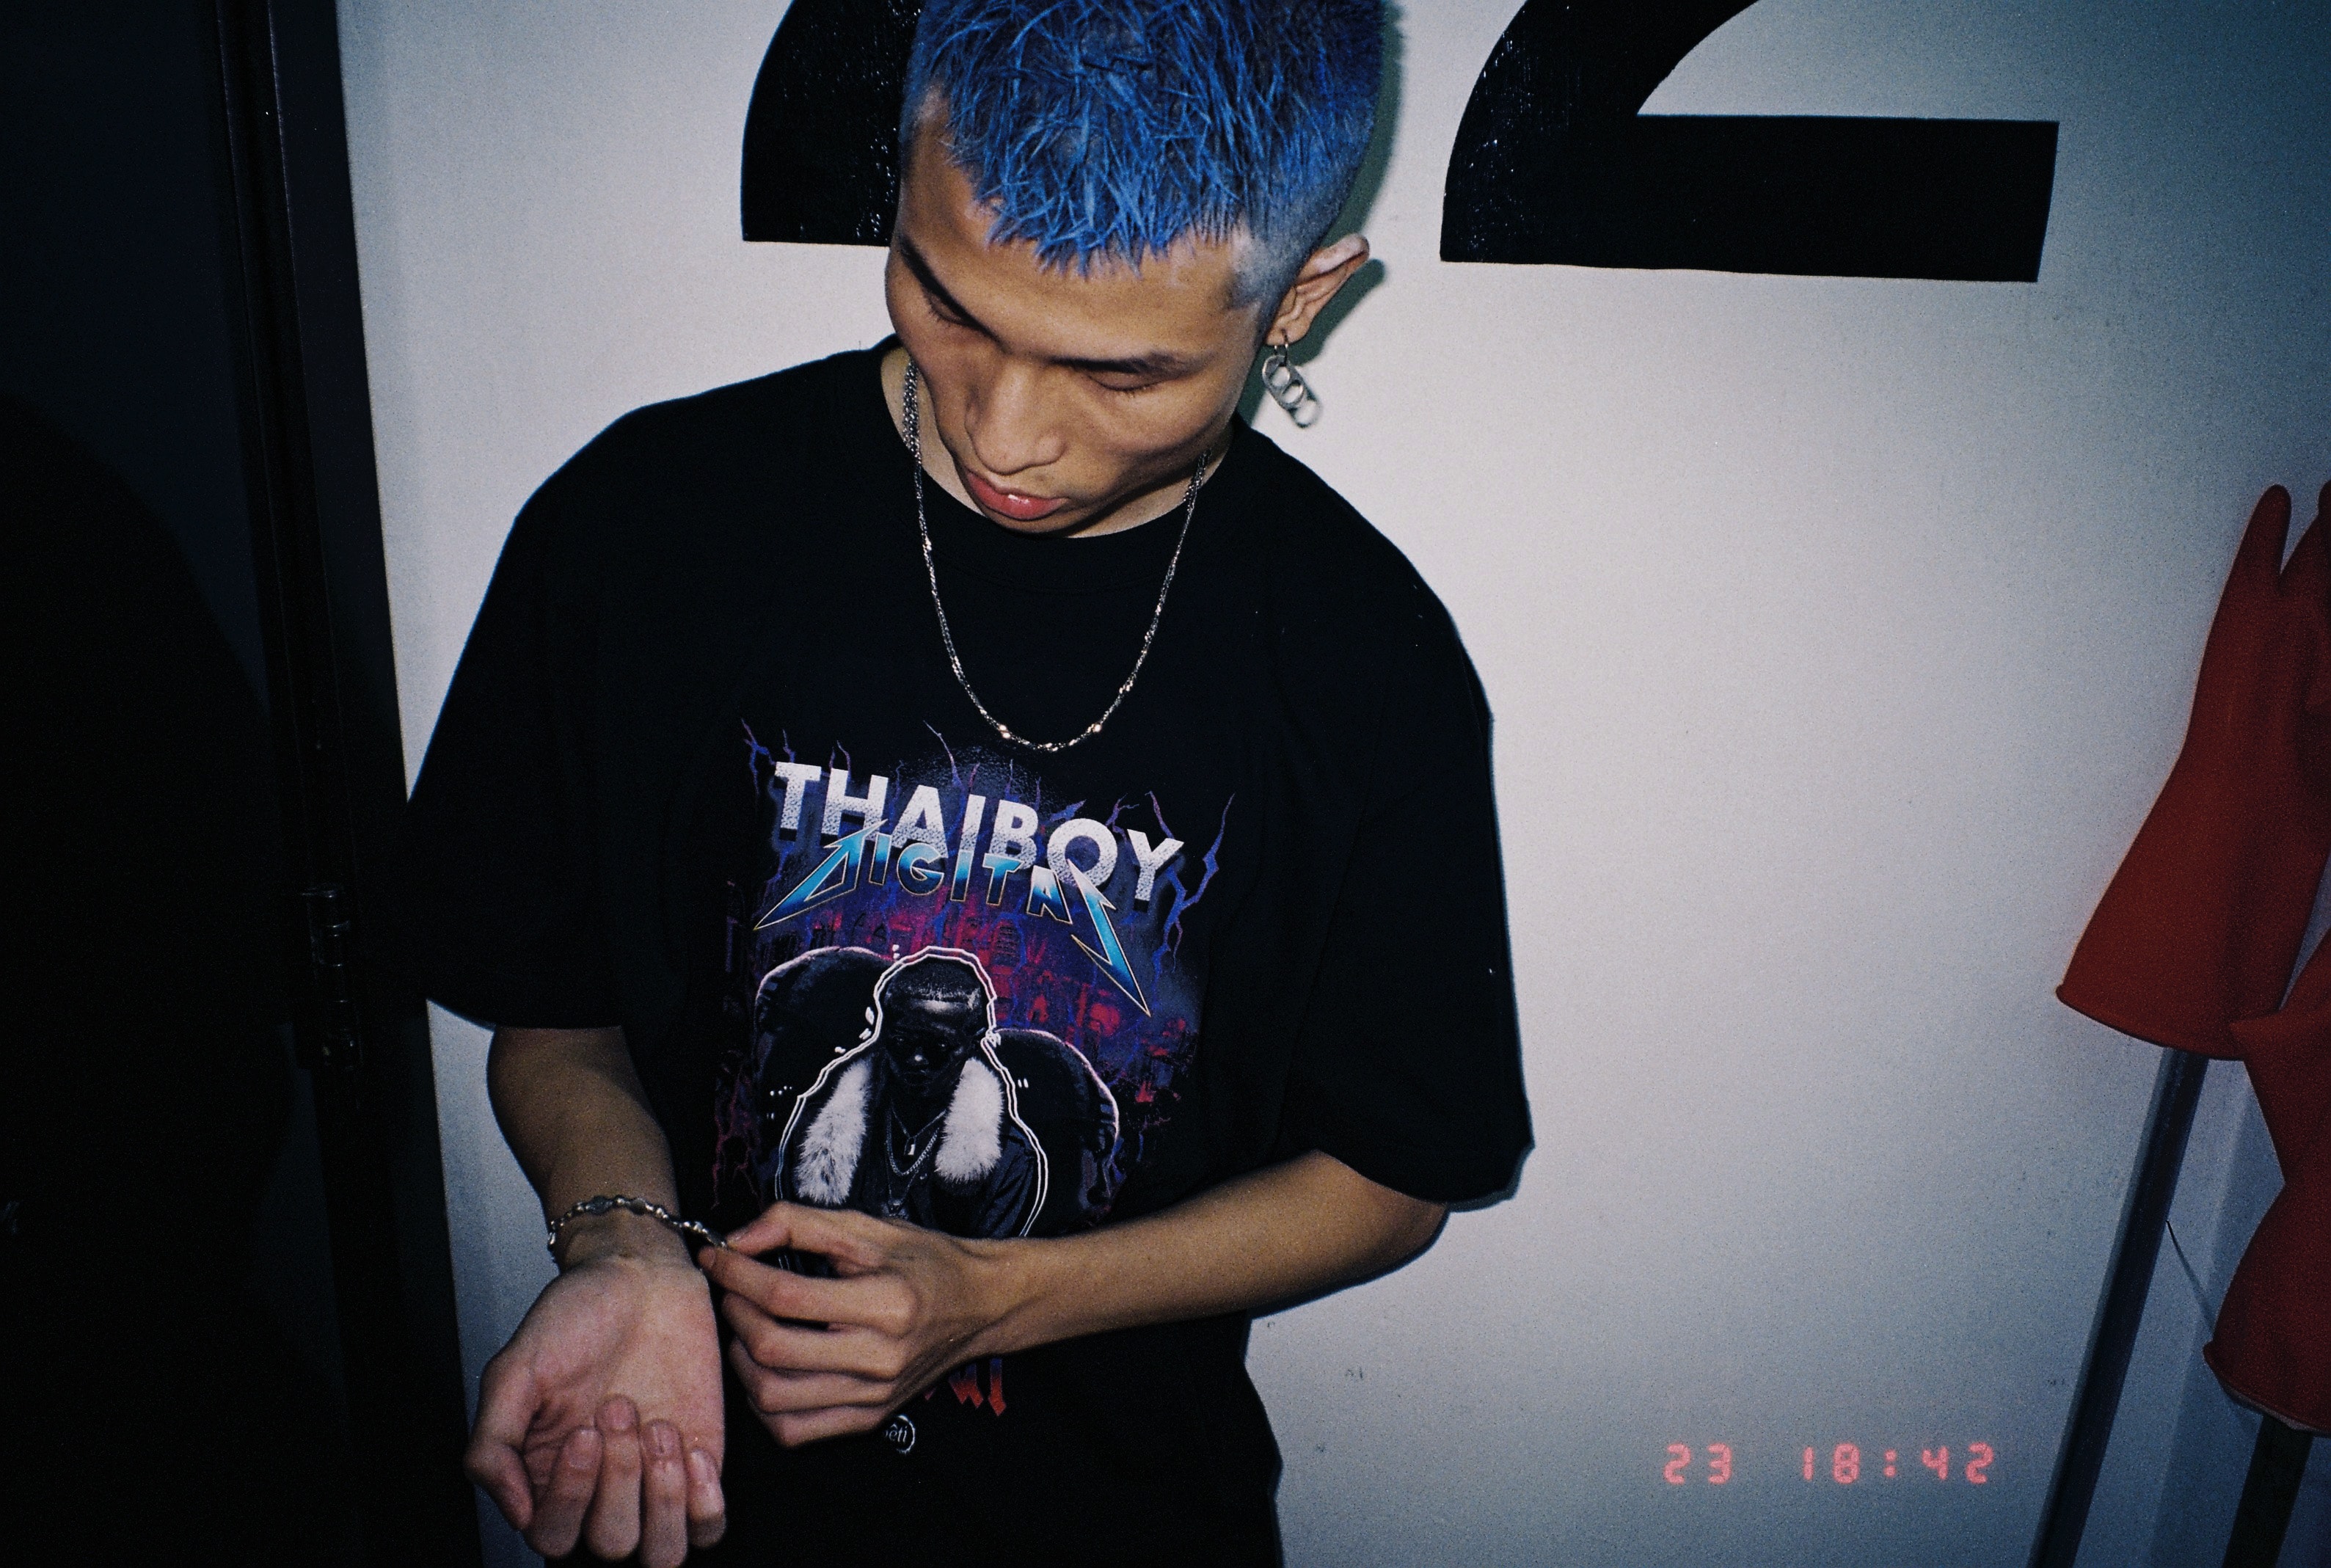 Thaiboy Digital Yeti Out Homage T Shirt collaboration tee may 2018 release date info drop